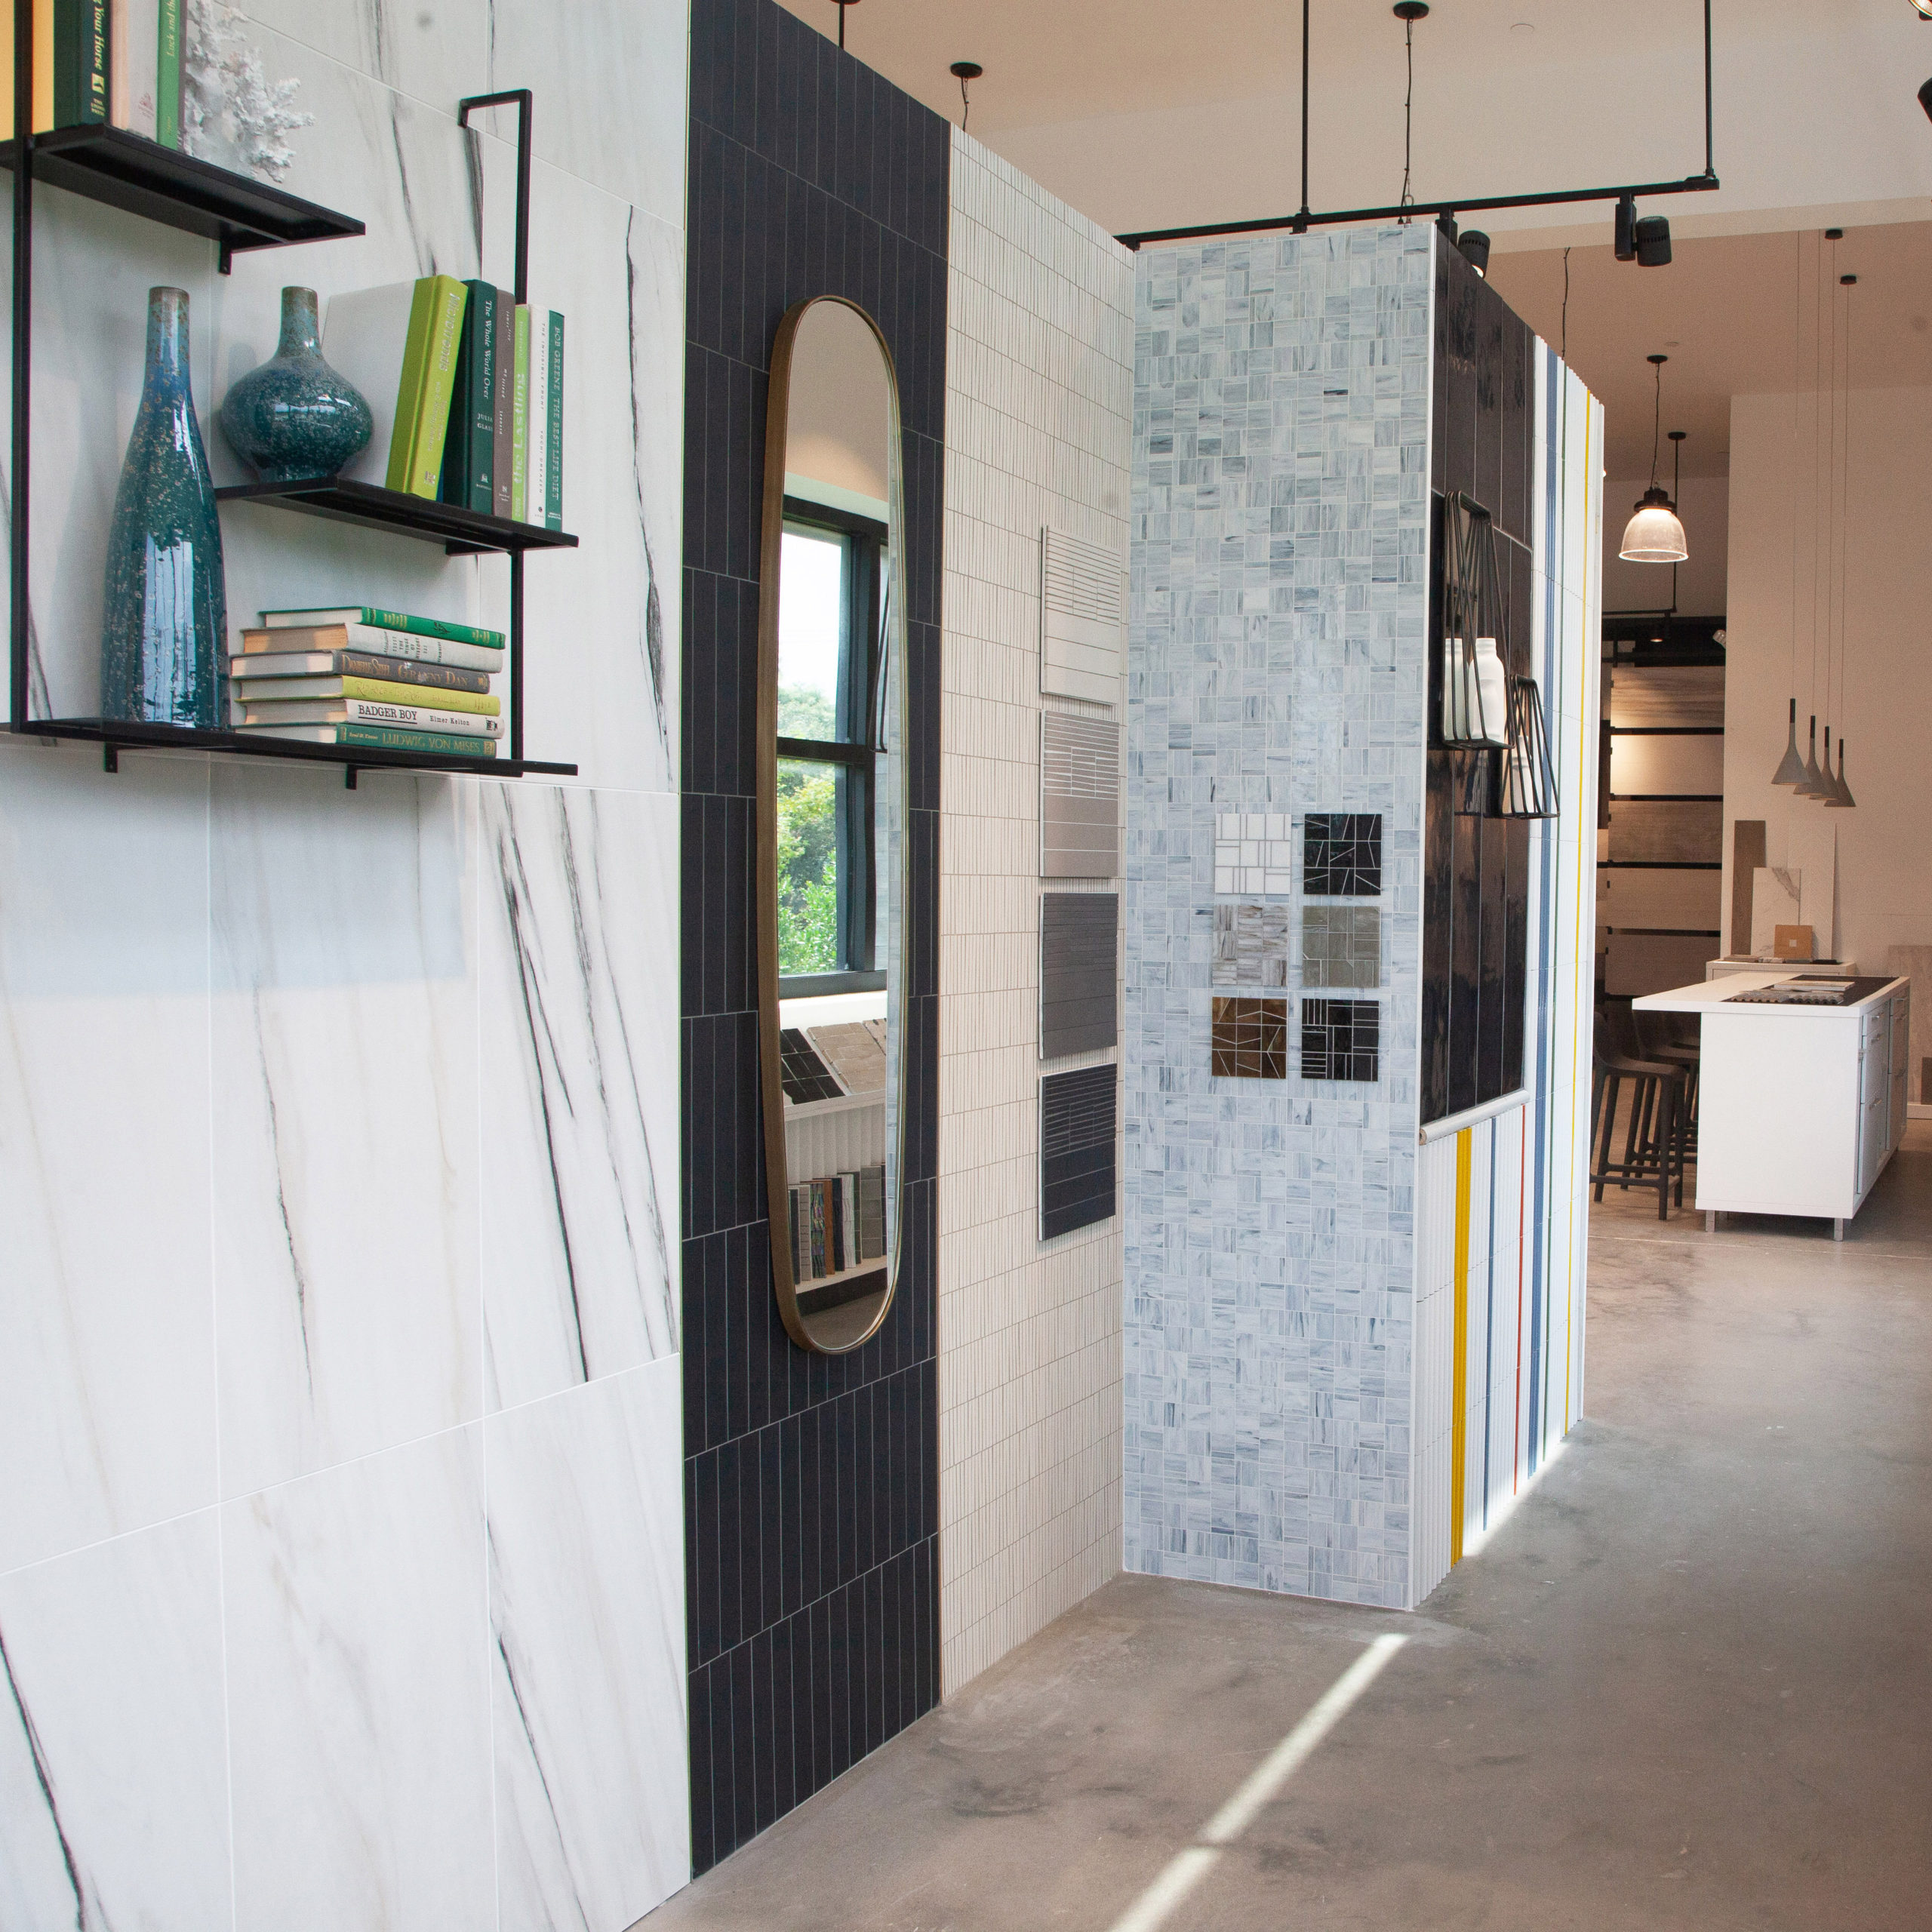 Nemo Tile + Stone, the 100-year-old surfacing materials company, based in New York City, has opened a 5,700-square-foot showroom on Flying Point Road in Southampton.